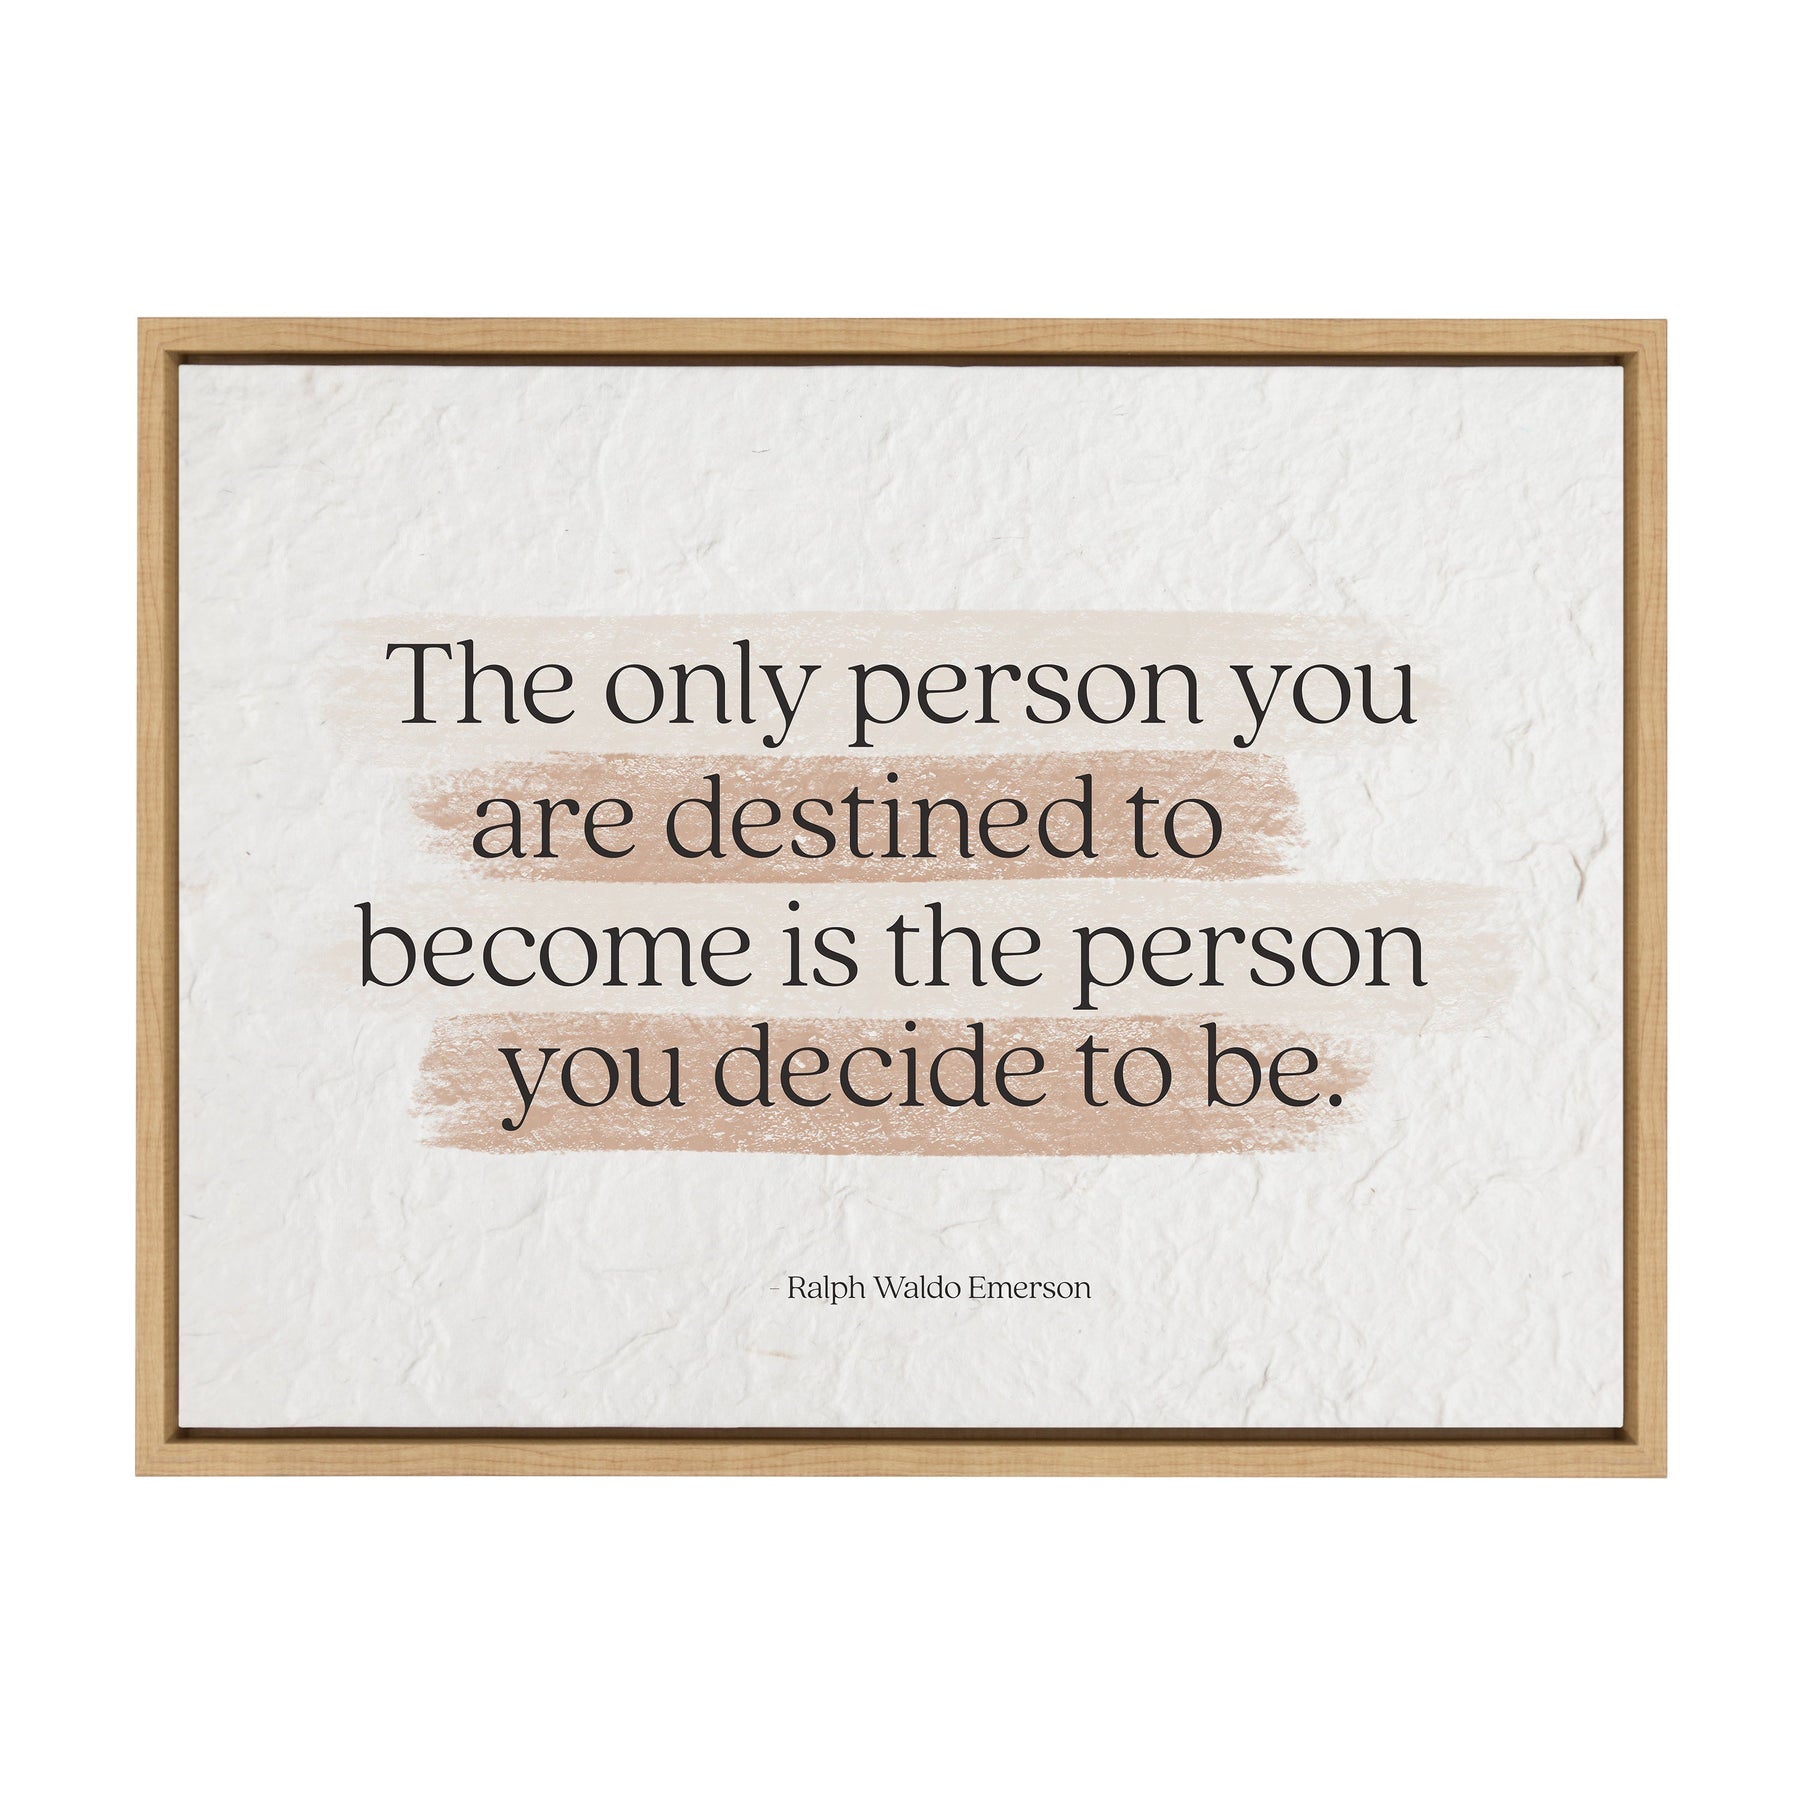 The only person you are destined to become is the person you decide to be  - Ralph Waldo Emerson / 24x18 Framed Canvas